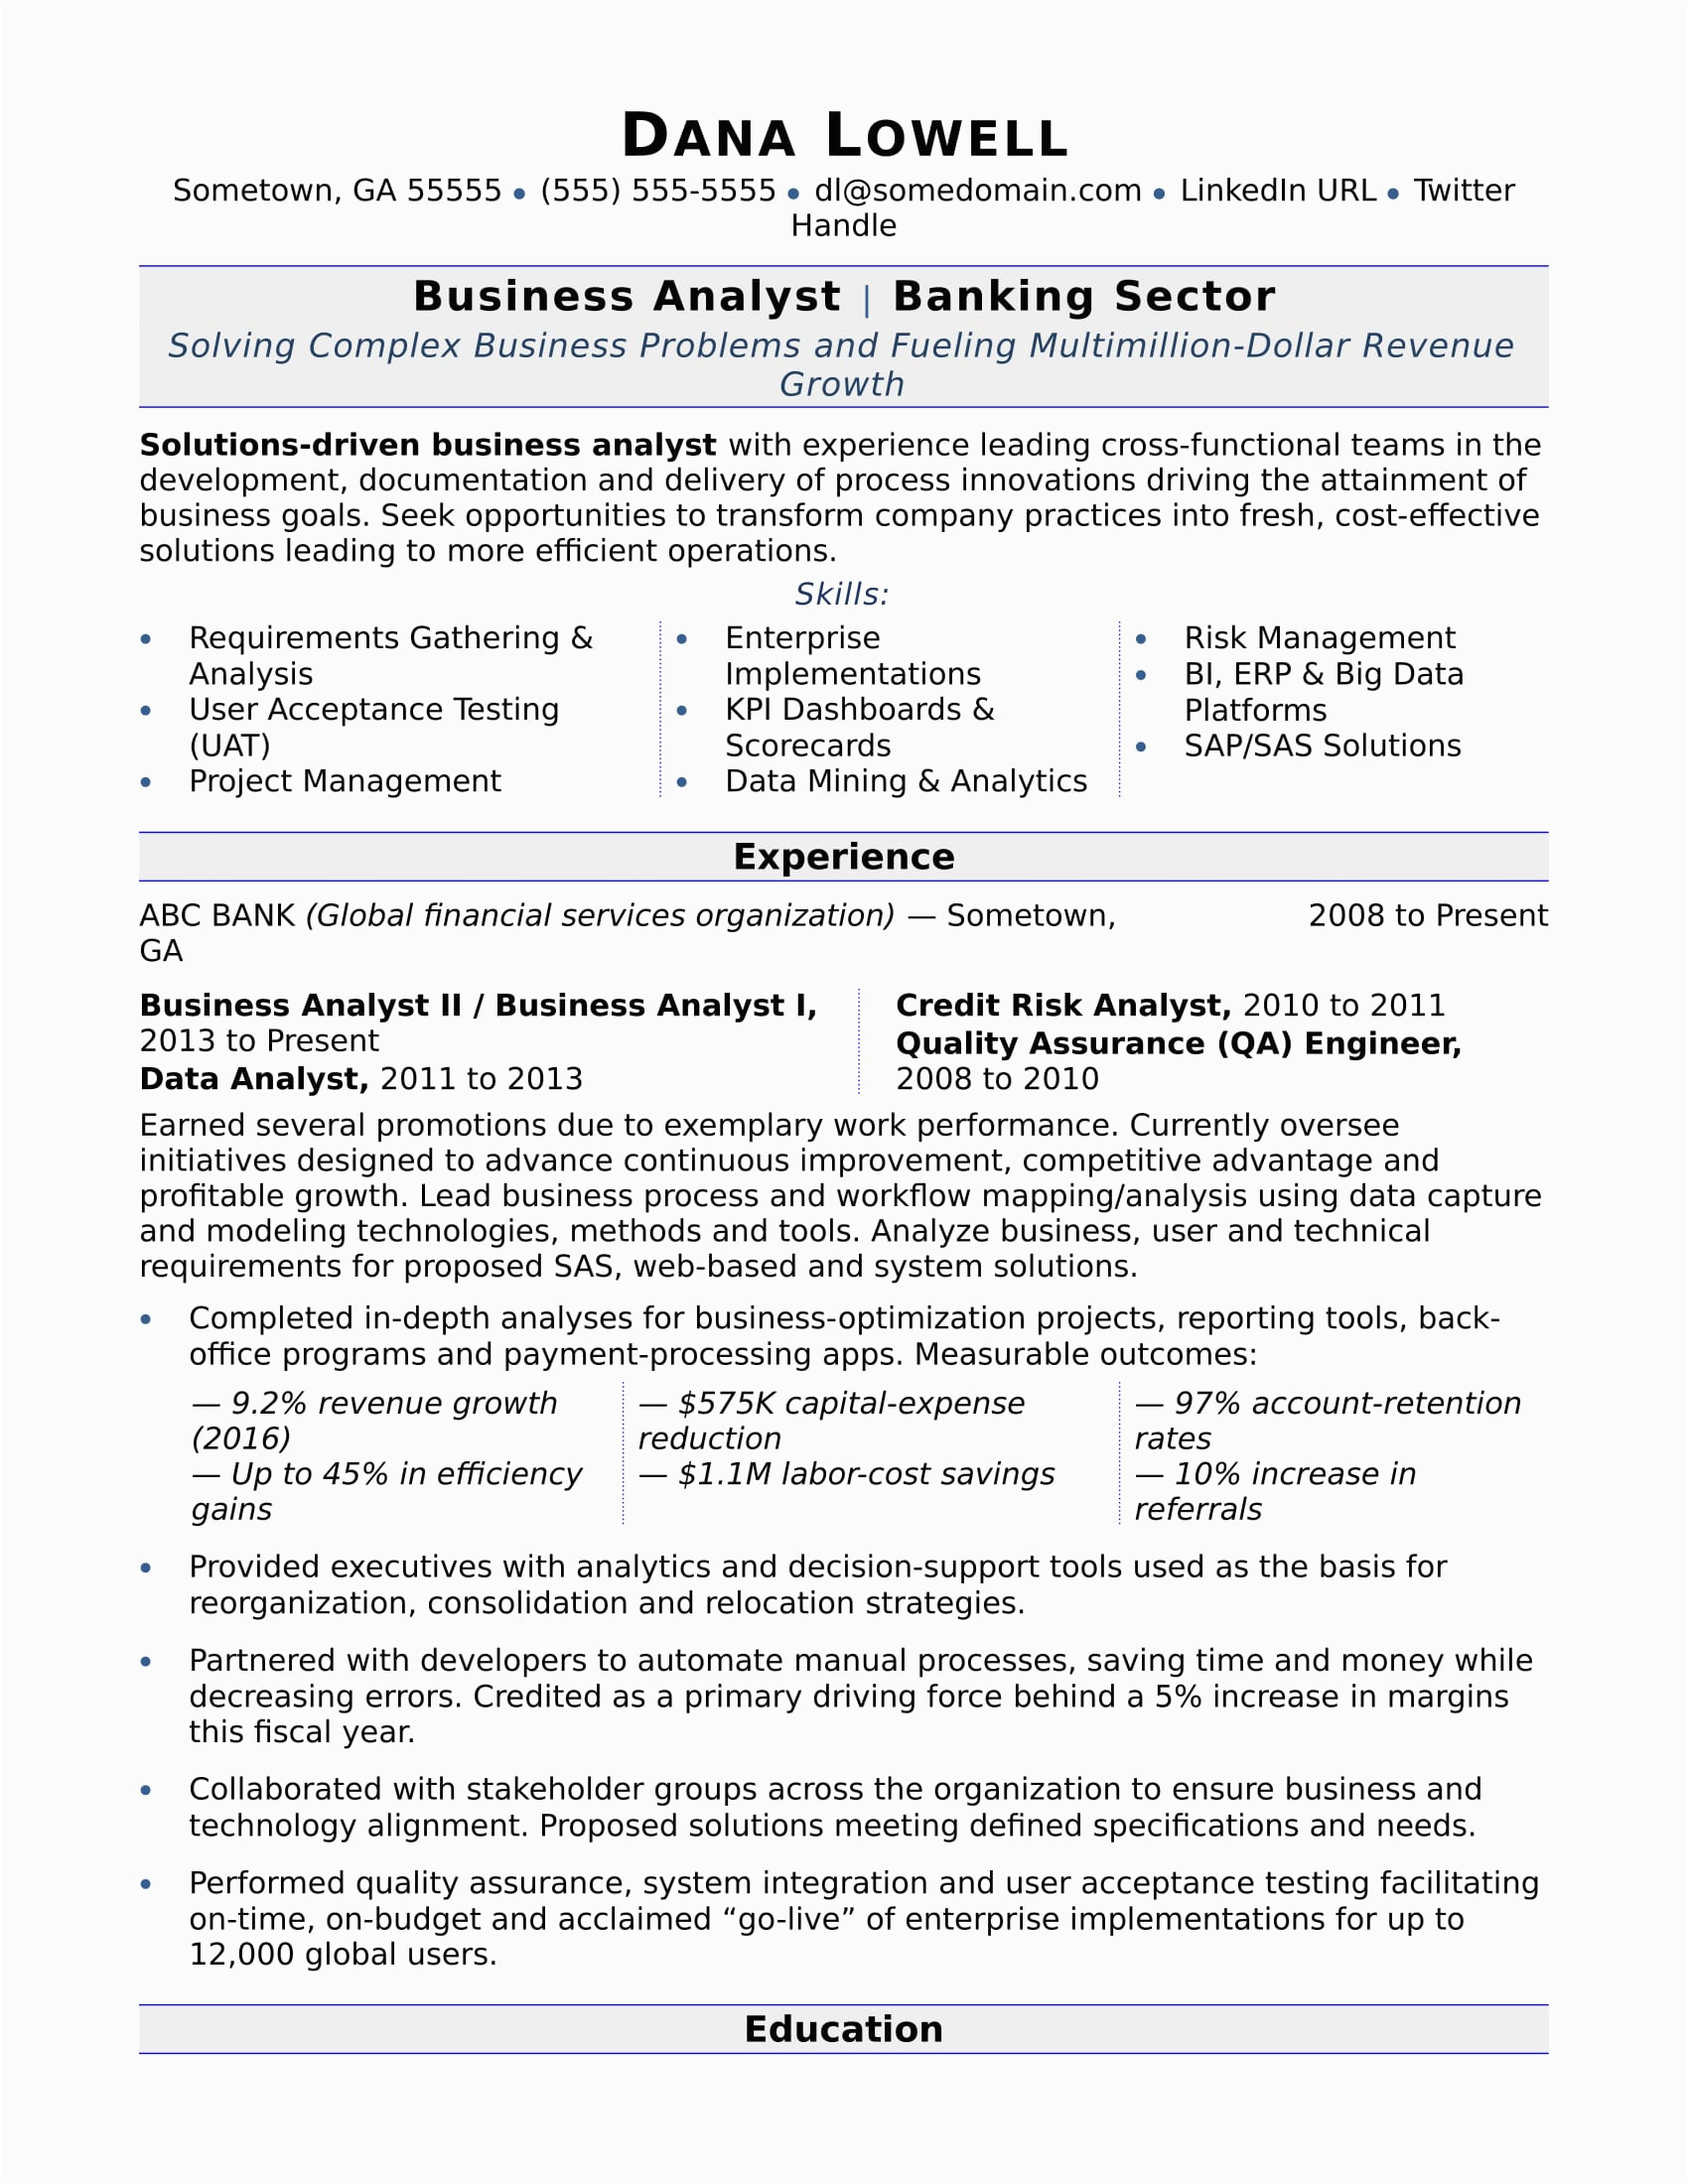 Resume Samples for Business System Analyst Business Analyst Resume Sample